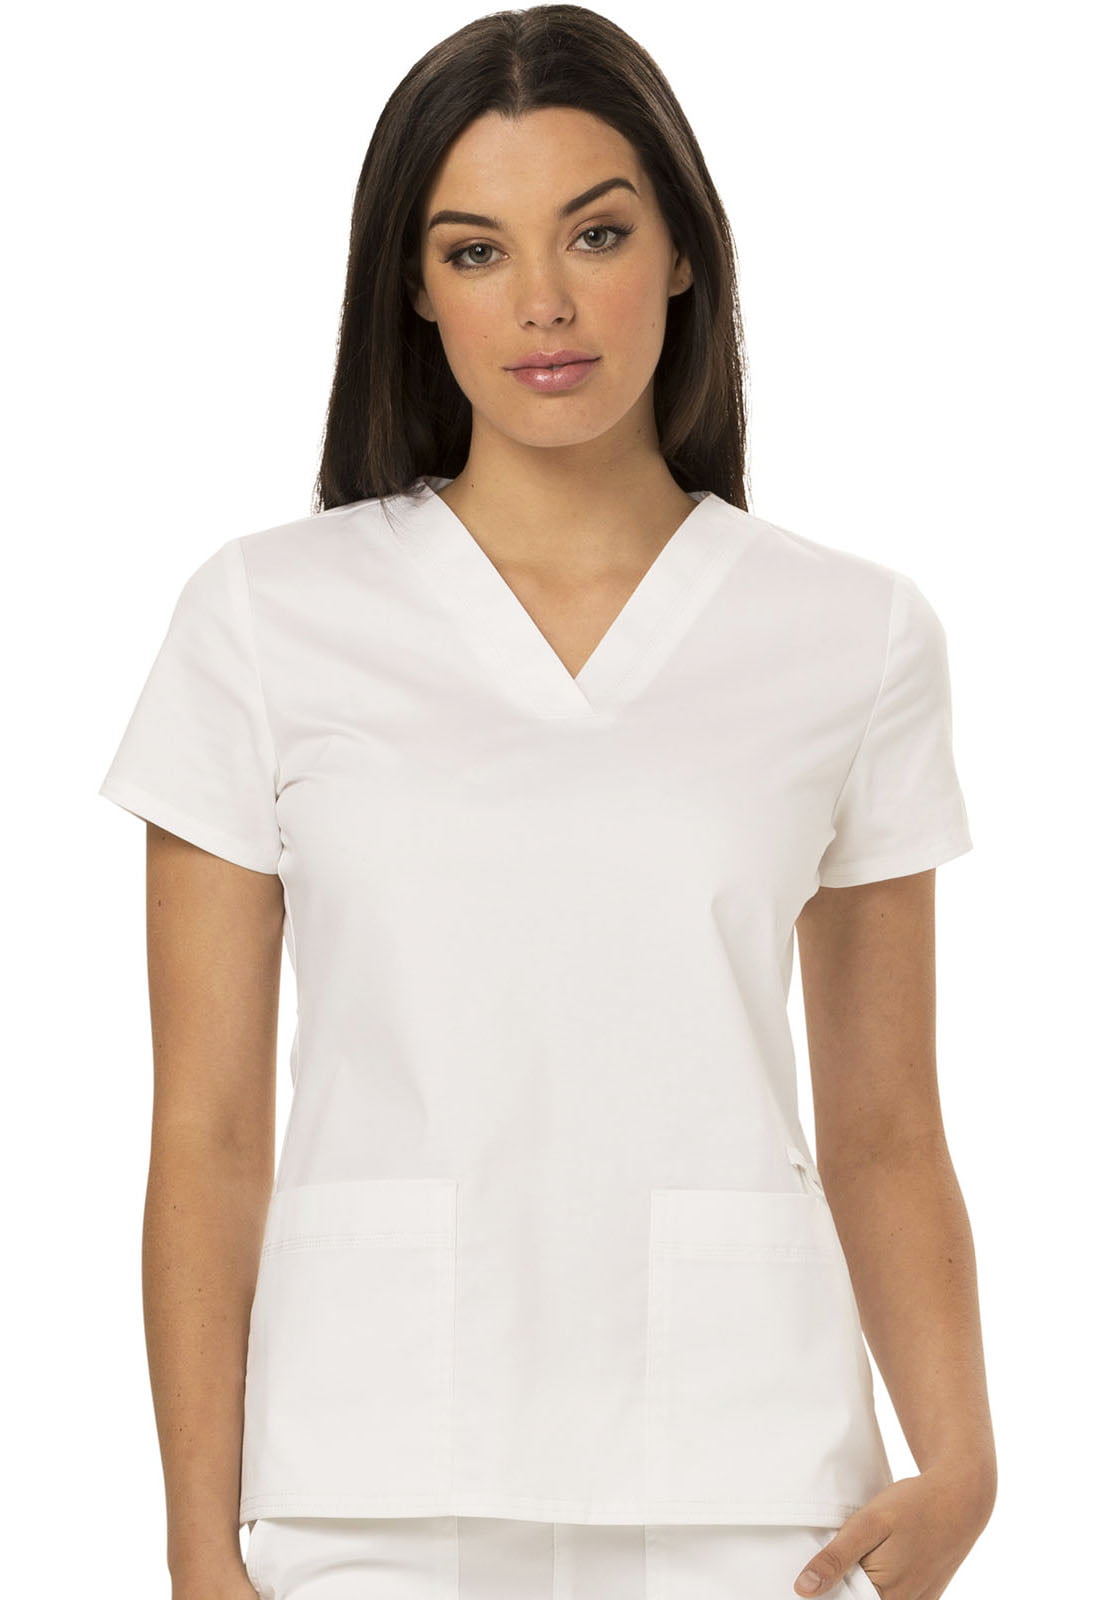 Dickies Gen Flex Style DK800 V Neck Scrub Top Pick Size & Color Free Shipping! 